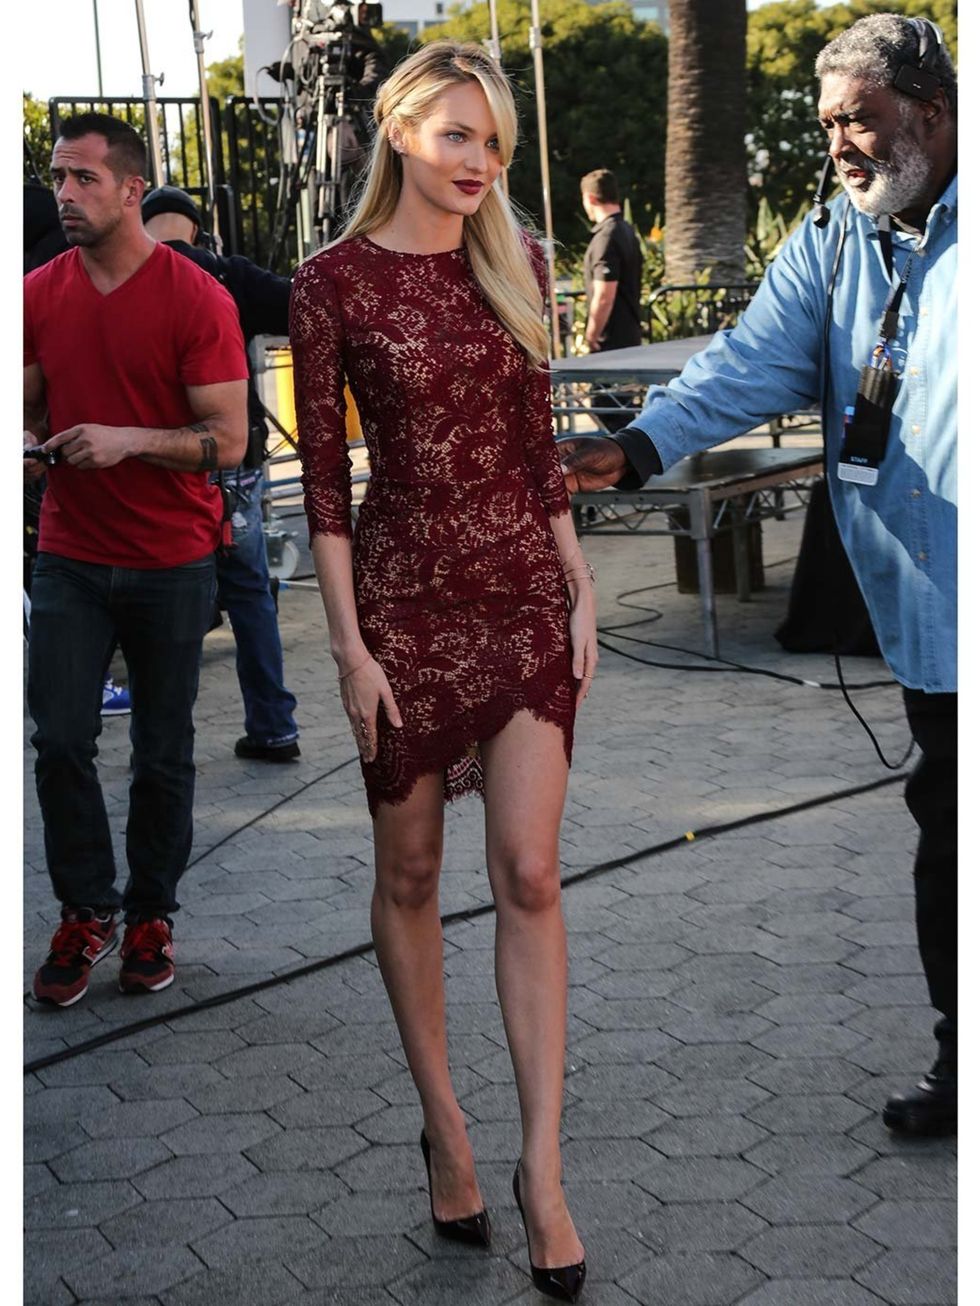 &lt;p&gt;Candice Swanepoel wearing a Lover Rosebud lace dress at the Universal City Walk.&lt;/p&gt;